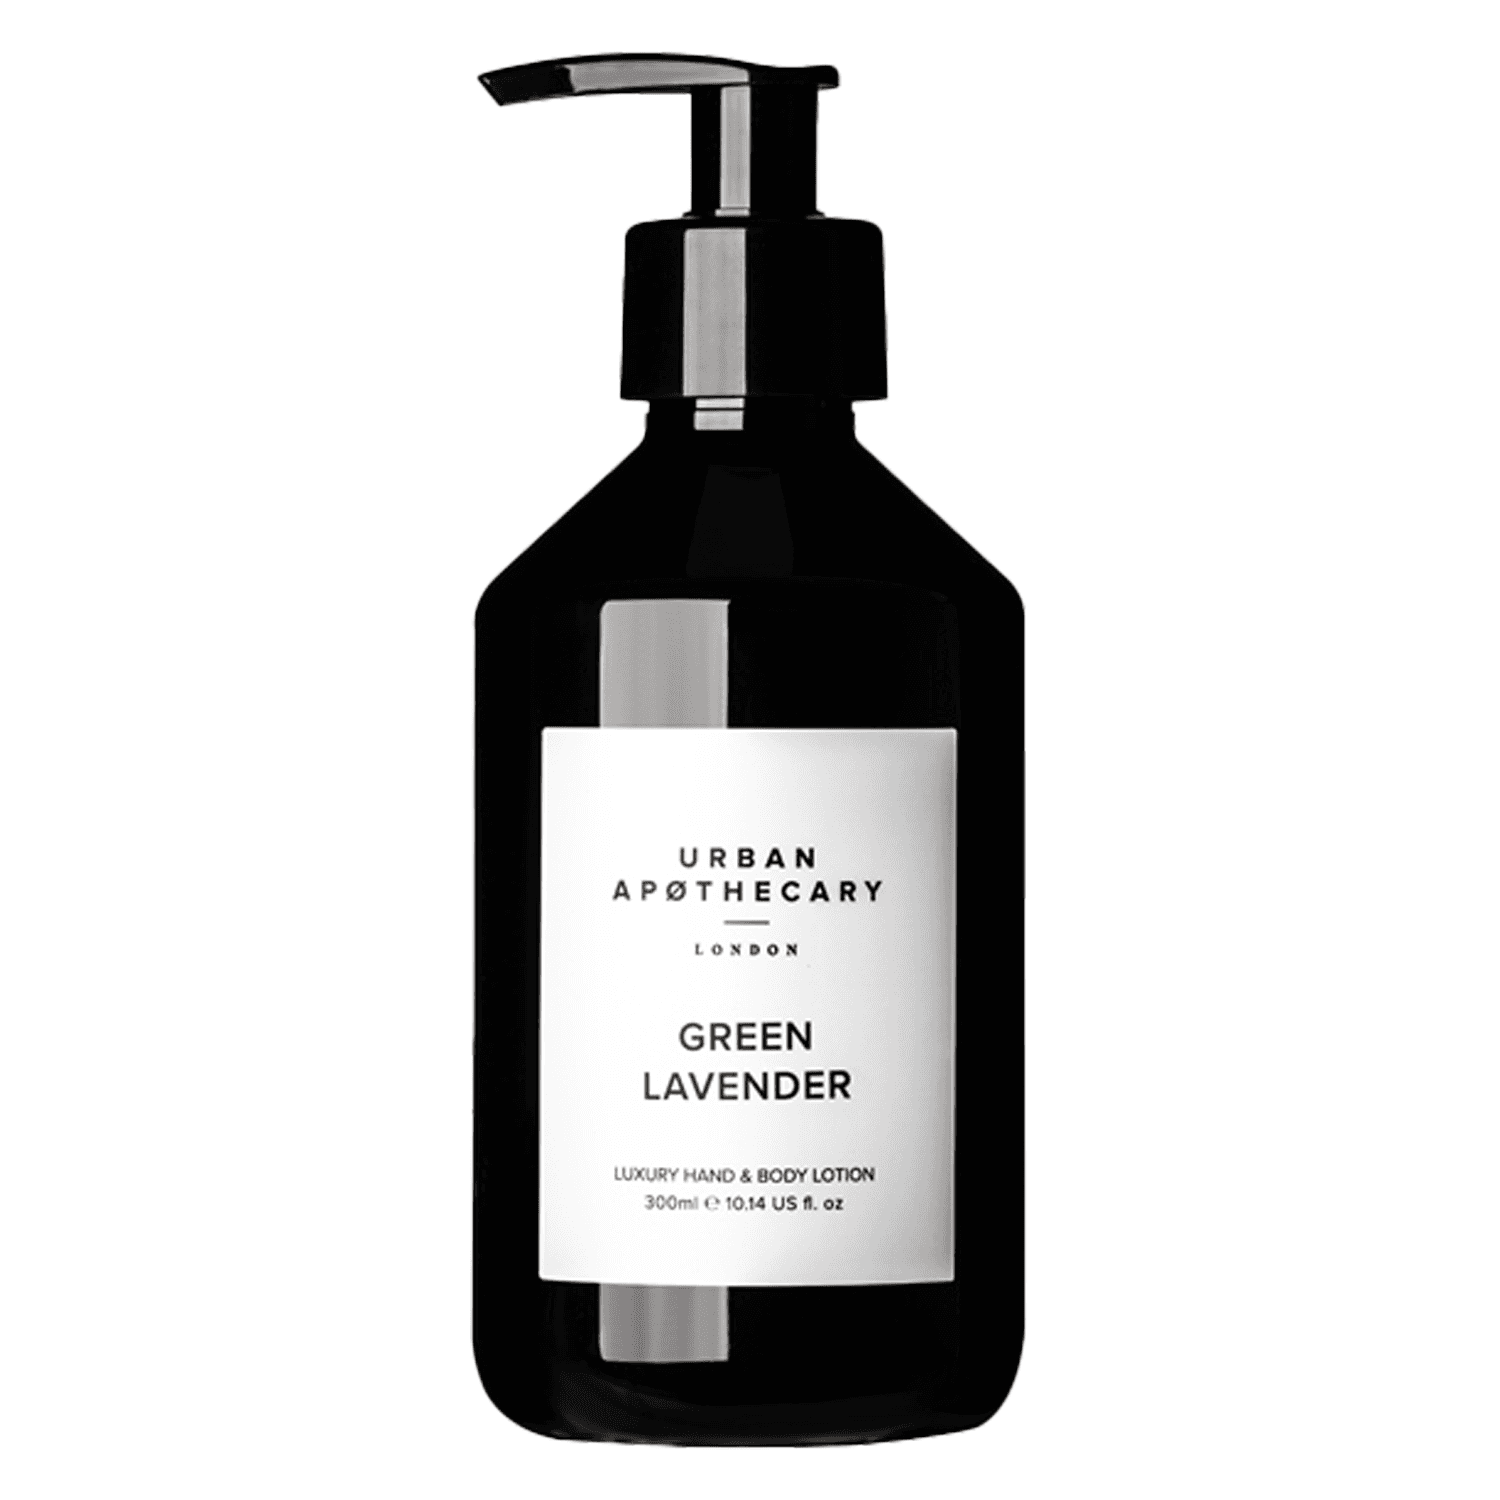 Urban Apothecary - Luxury Hand & Body Lotion Green Lavender